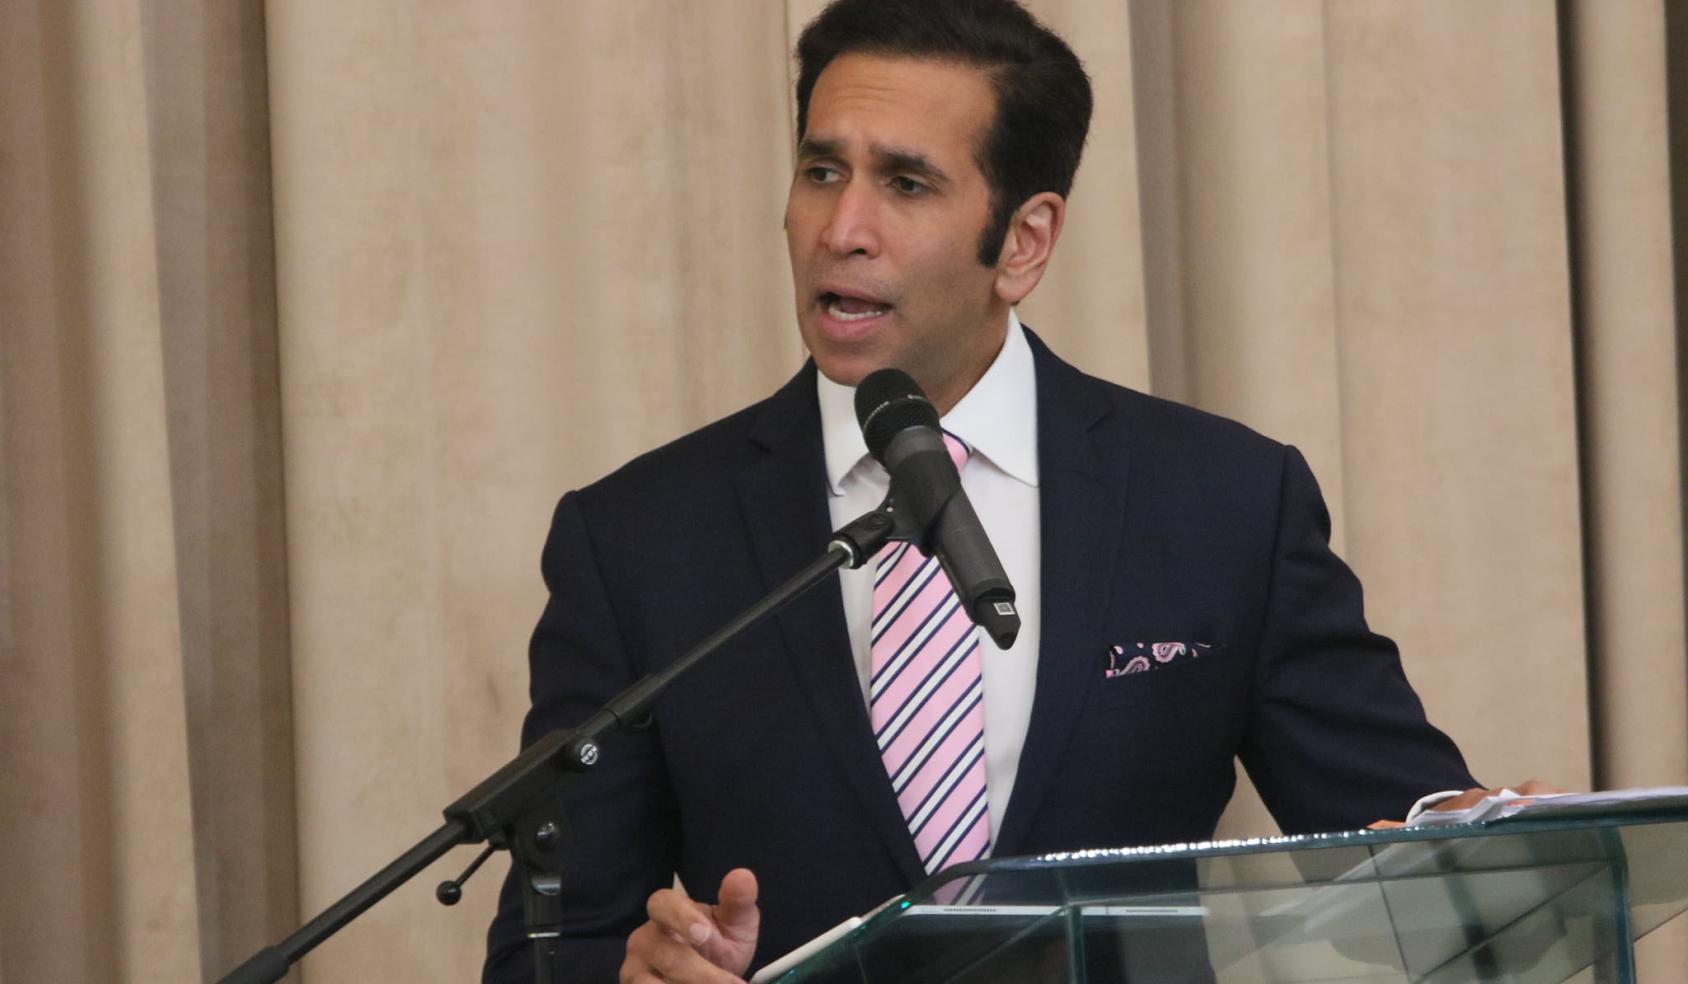 Faris Al-Rawi, Attorney General of Trinidad and Tobago shown speaking into a microphone at a podium on stage.